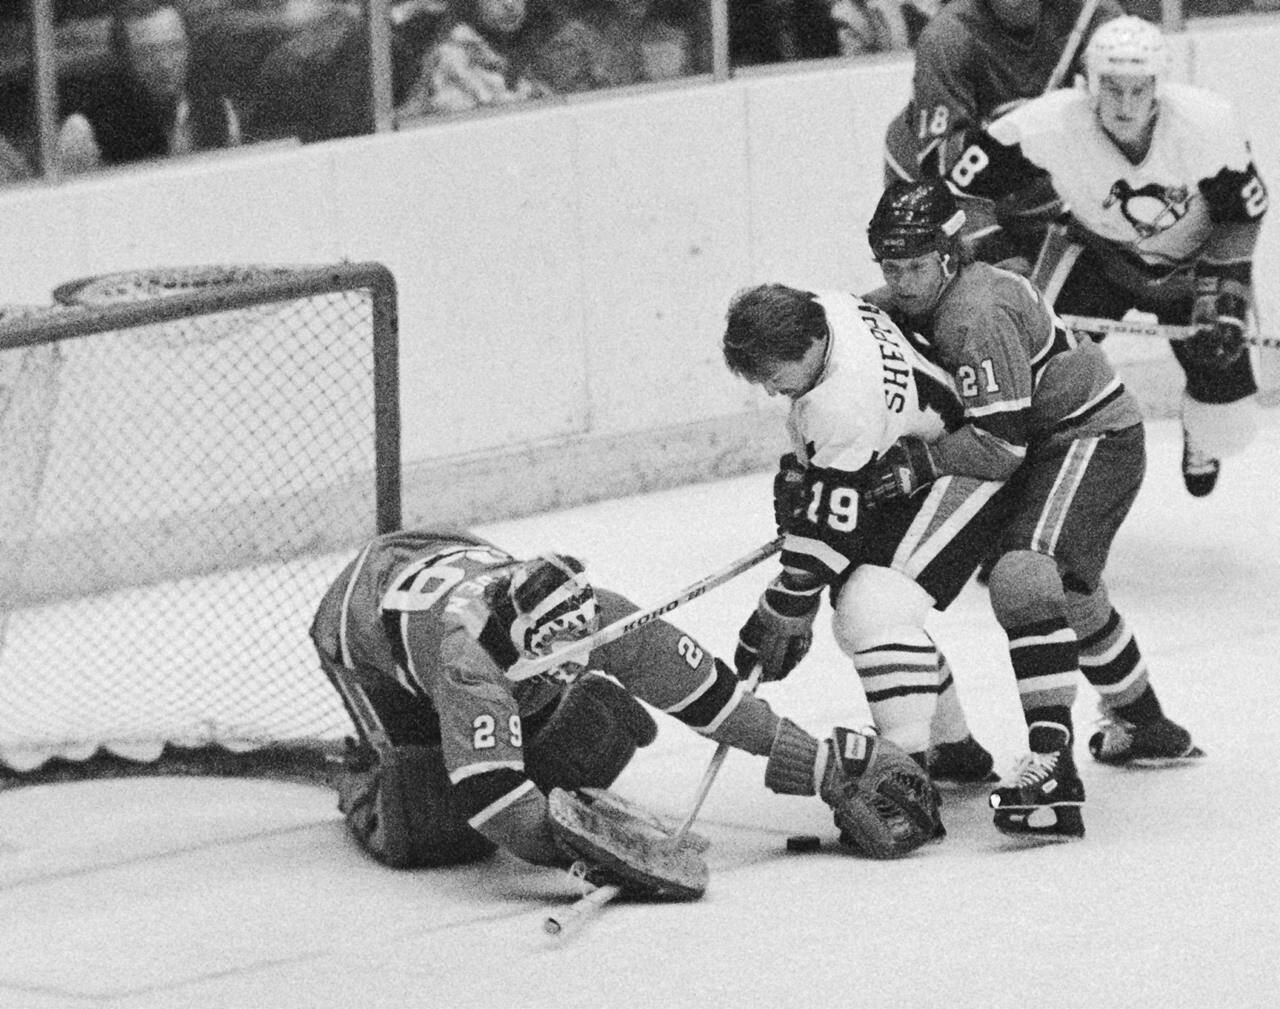 In this Wednesday, Jan. 31, 1979 file photo, goalie Ken Dryden reaches to cover the puck in front of his net during a National Hockey League game against Pittsburgh. For which team did Dryden play? (AP Photo/R.C. Greenawalt, File)